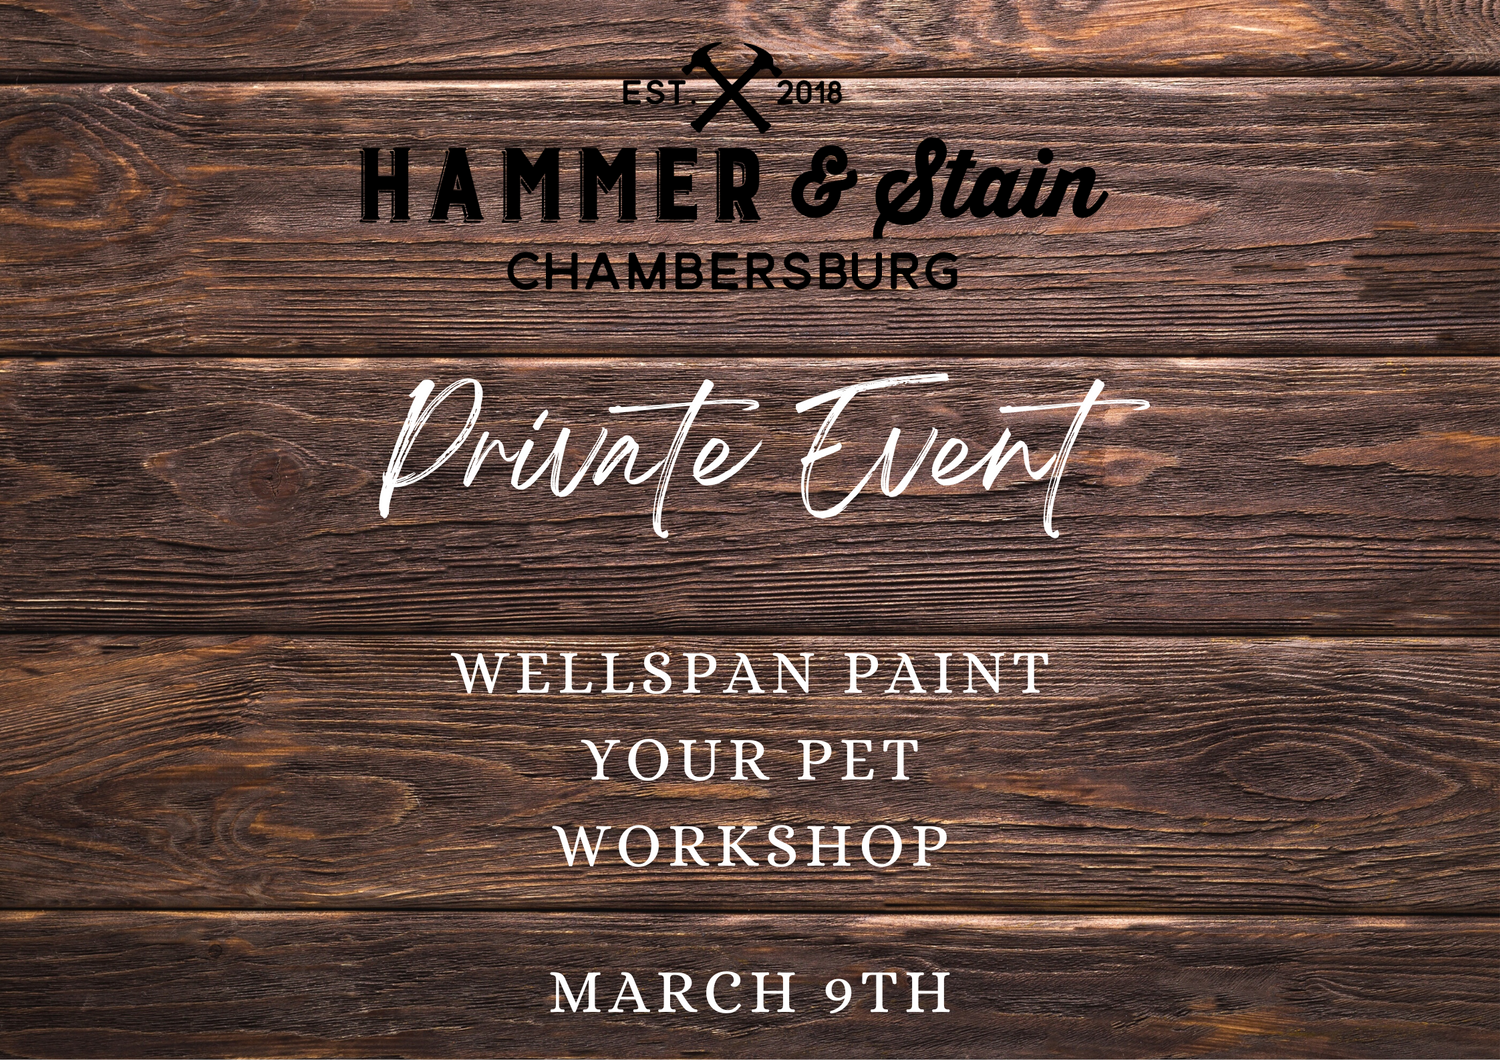 Collection Candle Making Workshop – Hammer & Stain Chambersburg